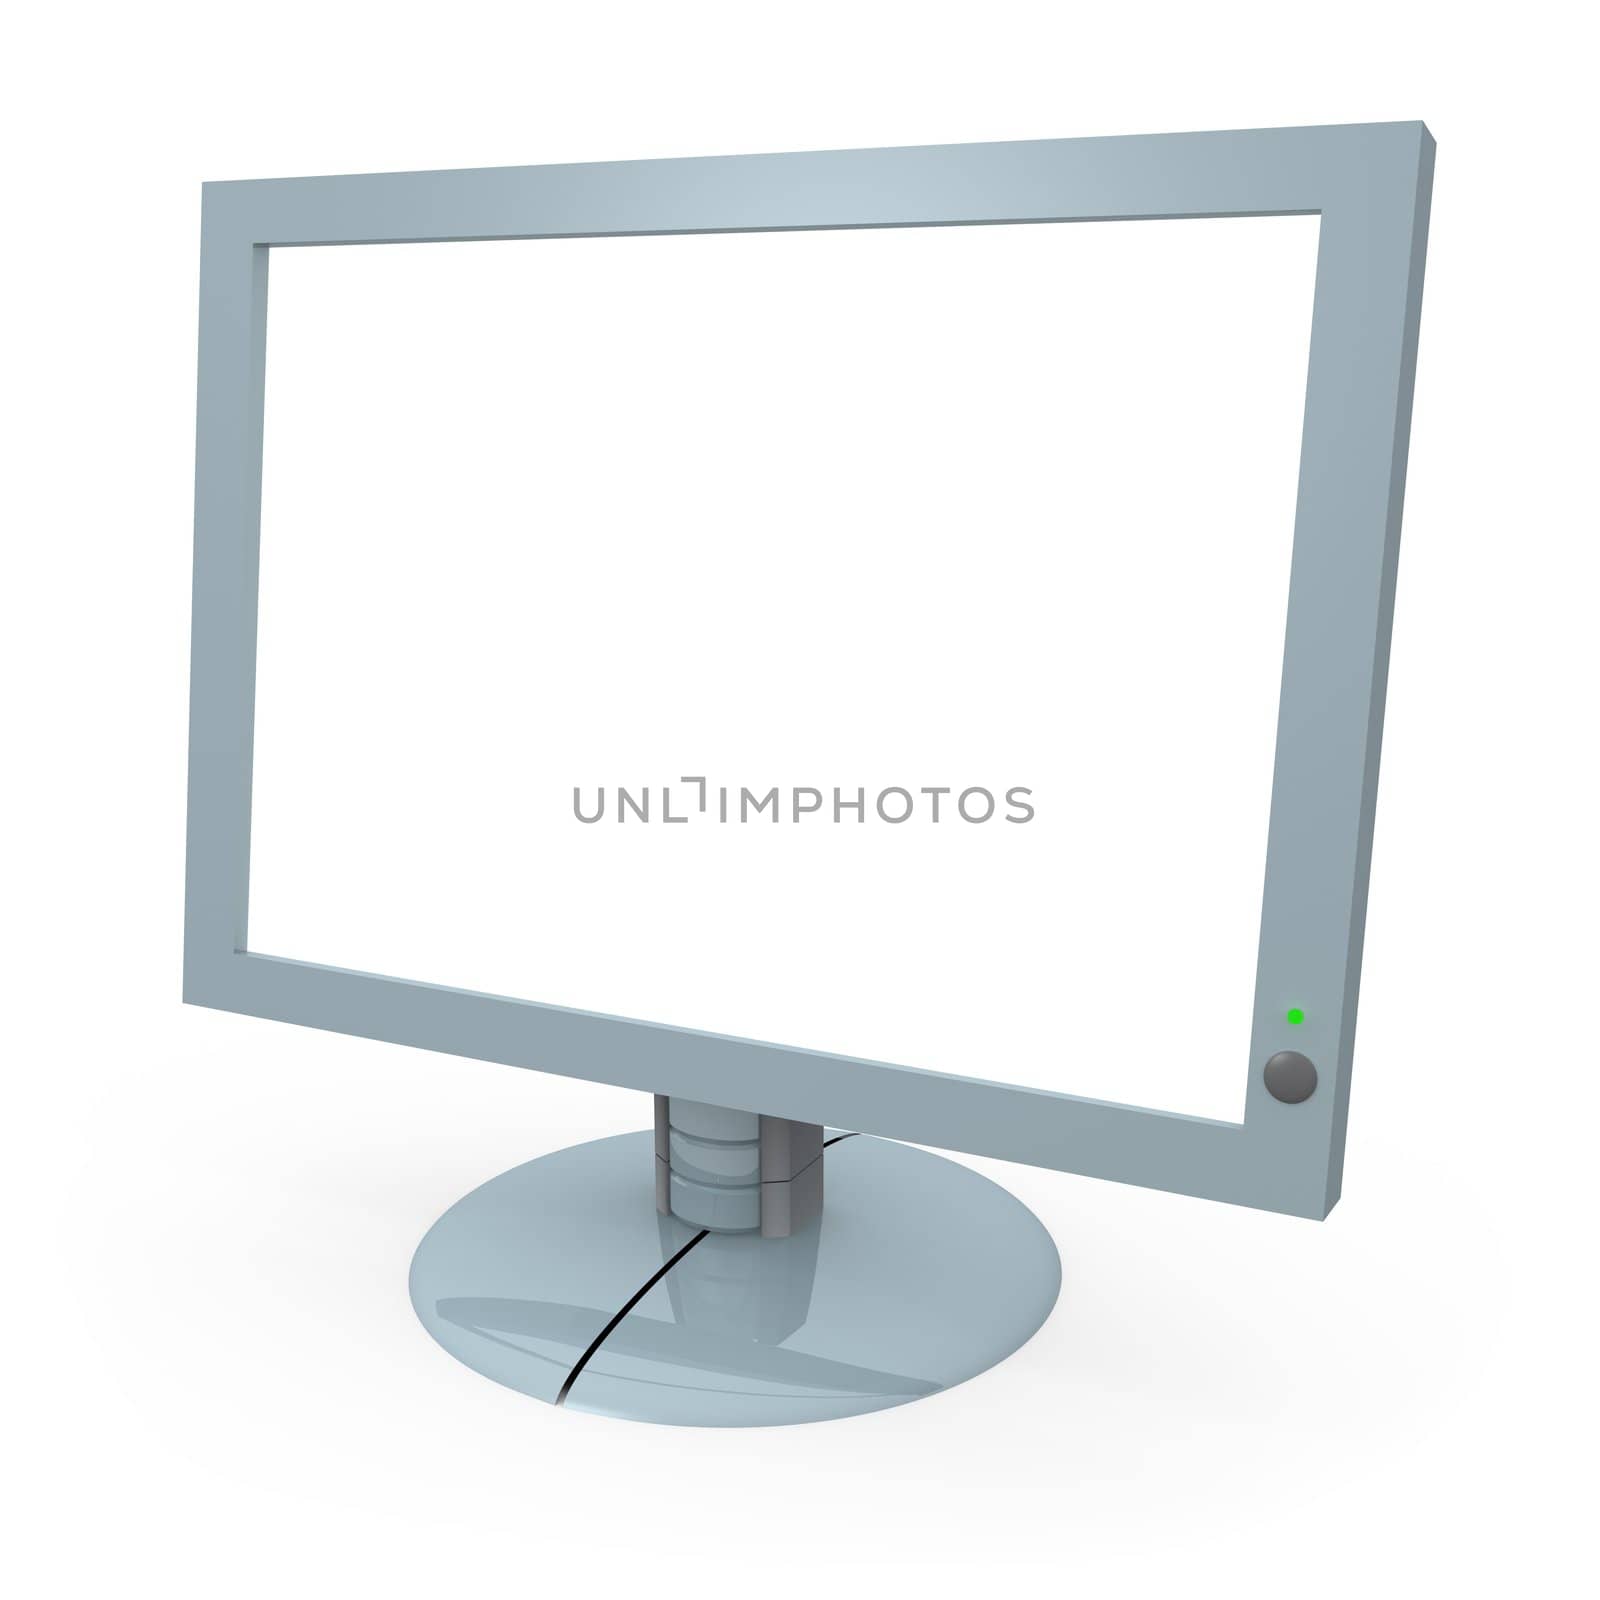 Computer monitor with blank screen by 3pod